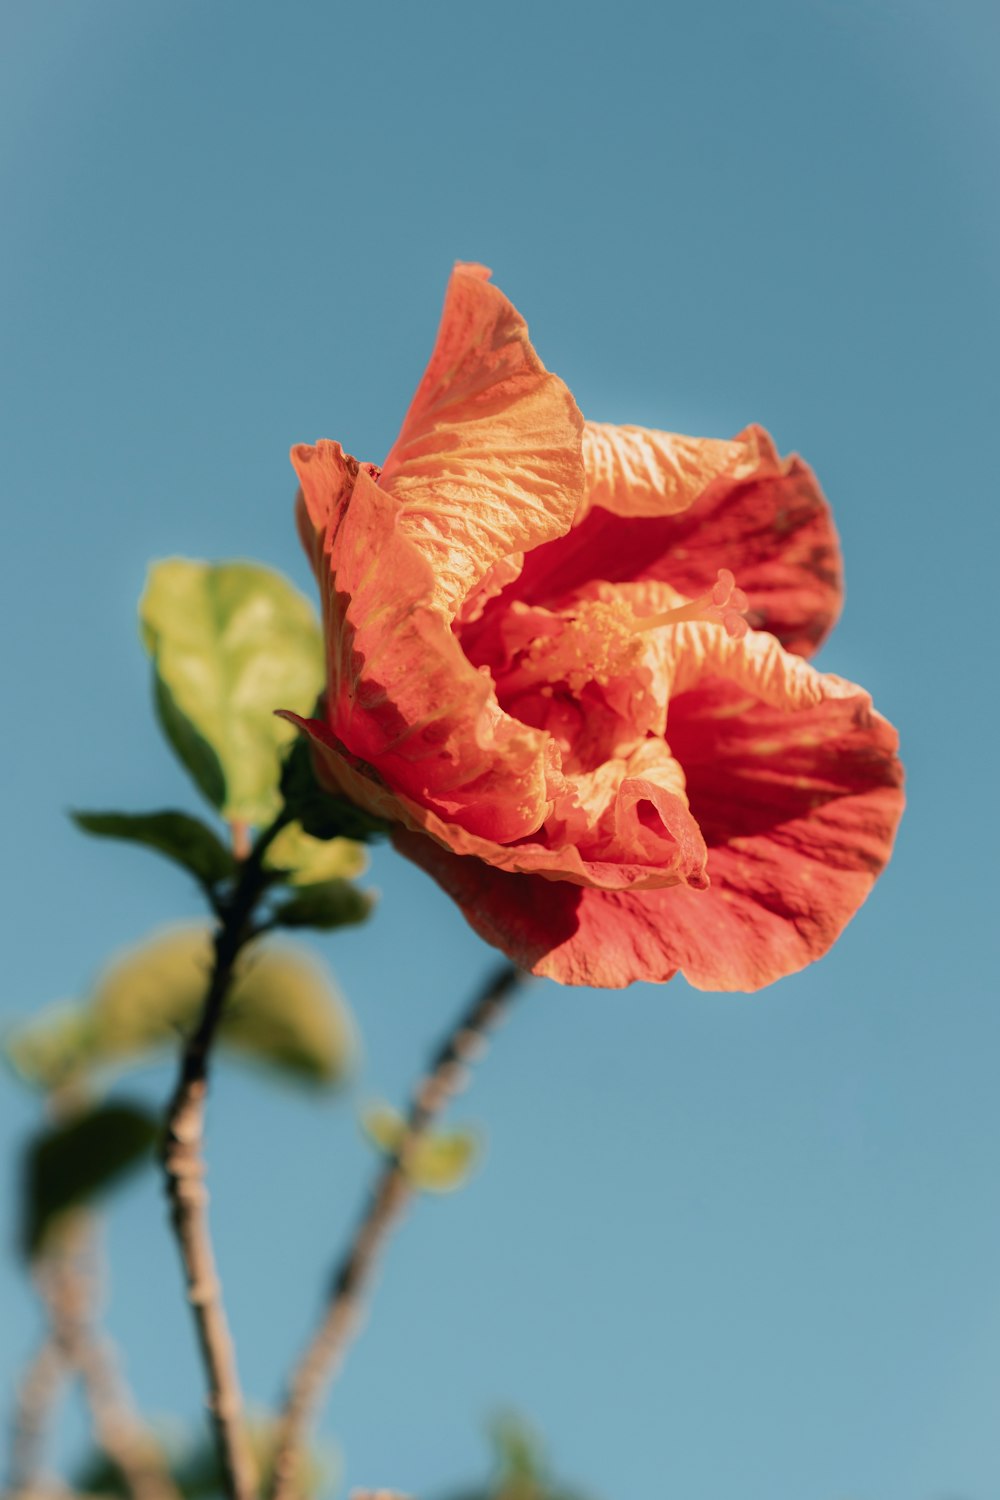 a large orange flower with a blue sky in the background